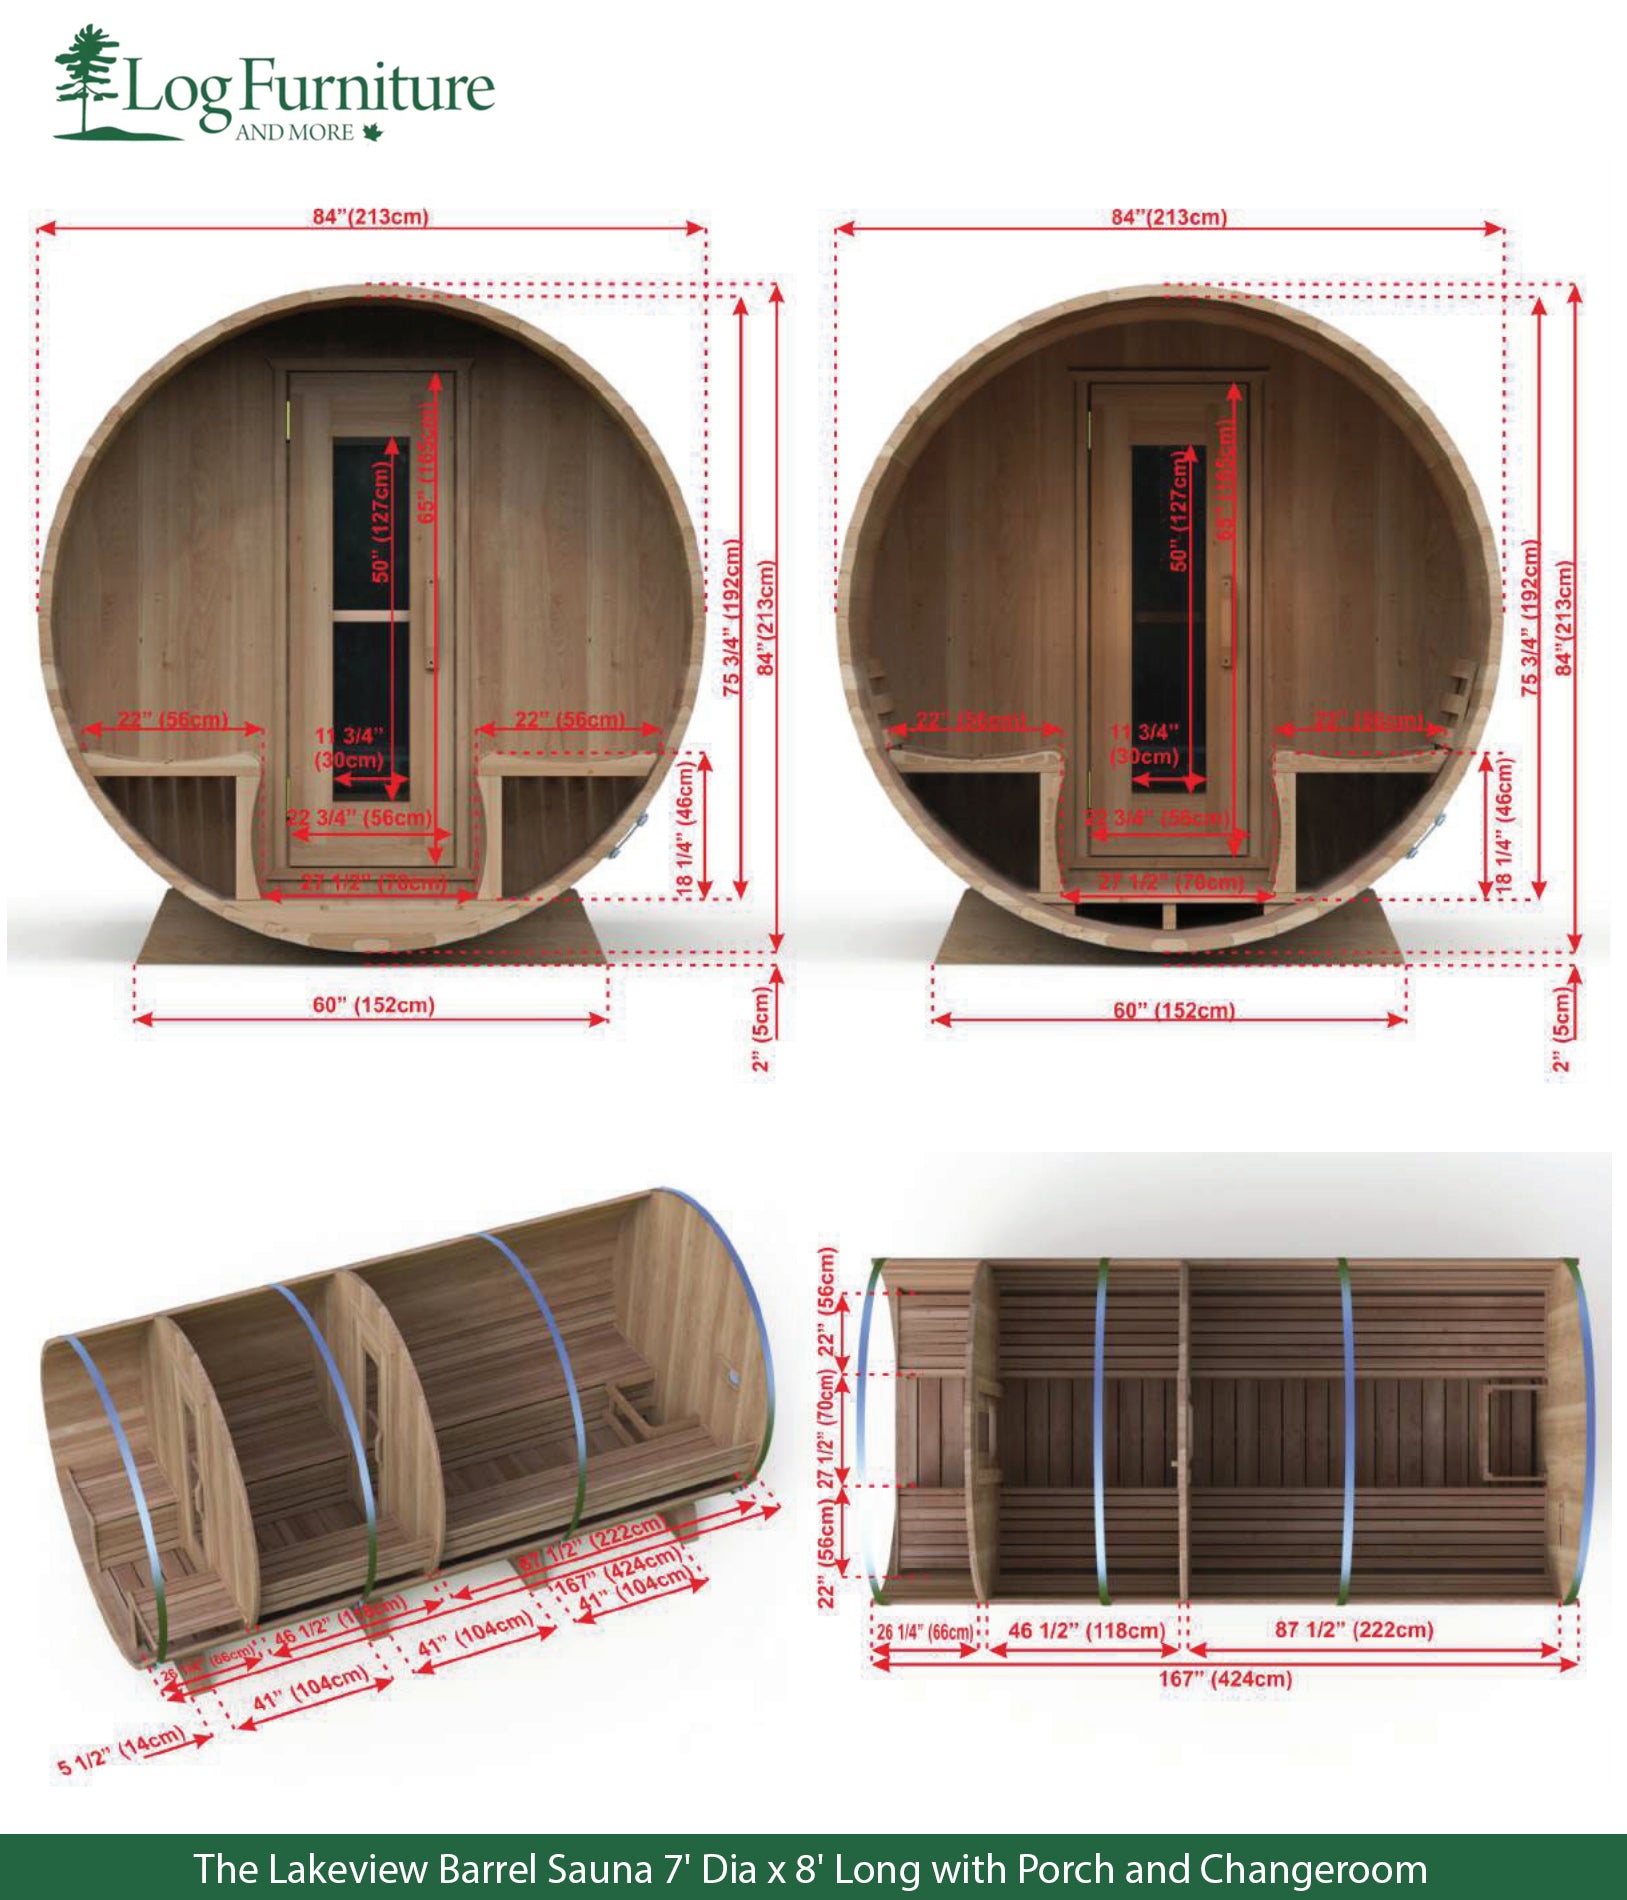 The Lakeview Barrel Sauna 7' Dia x 8' Long with Porch and Changeroom